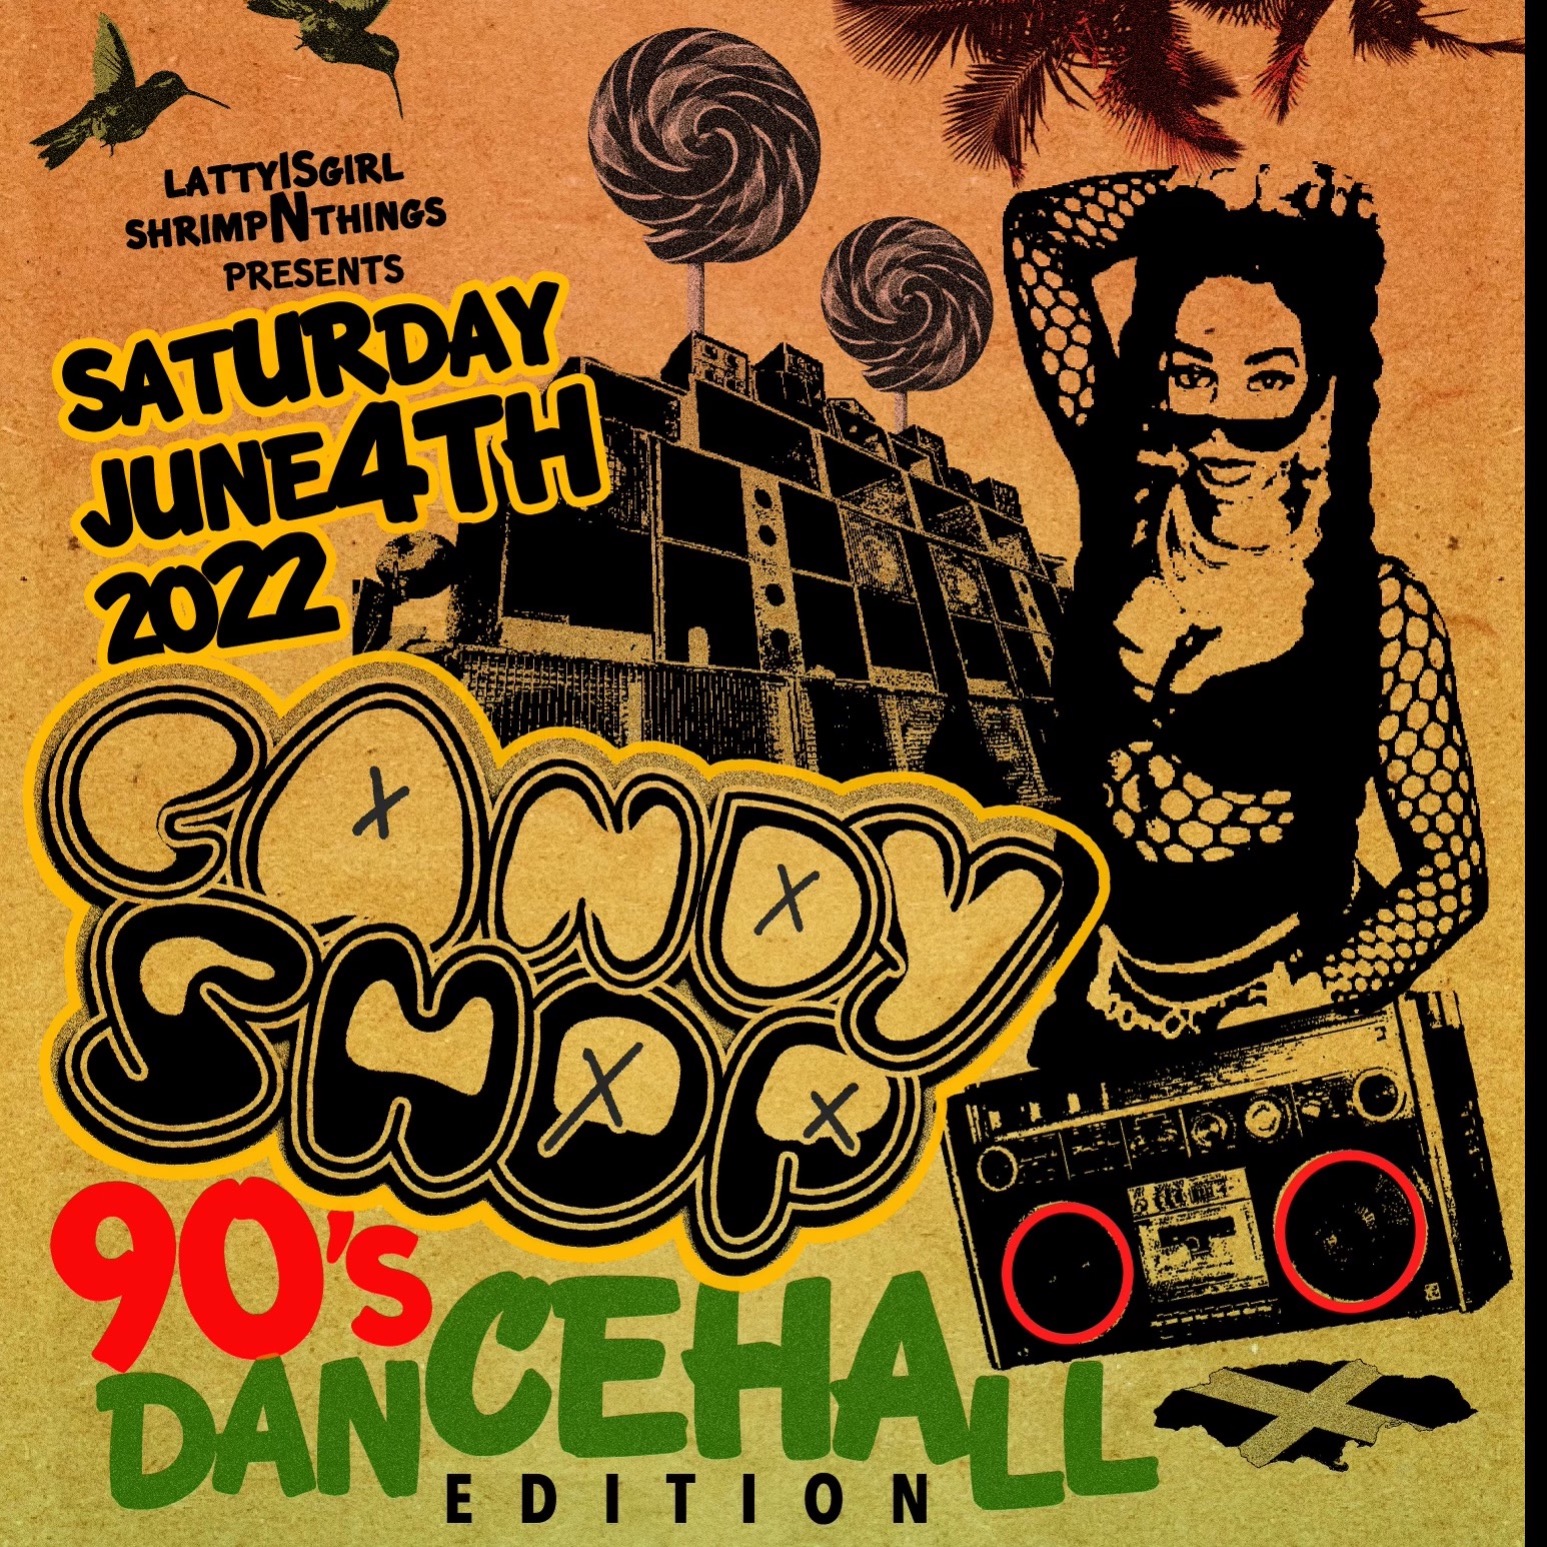 Candy Shop 90's Dancehall Edition